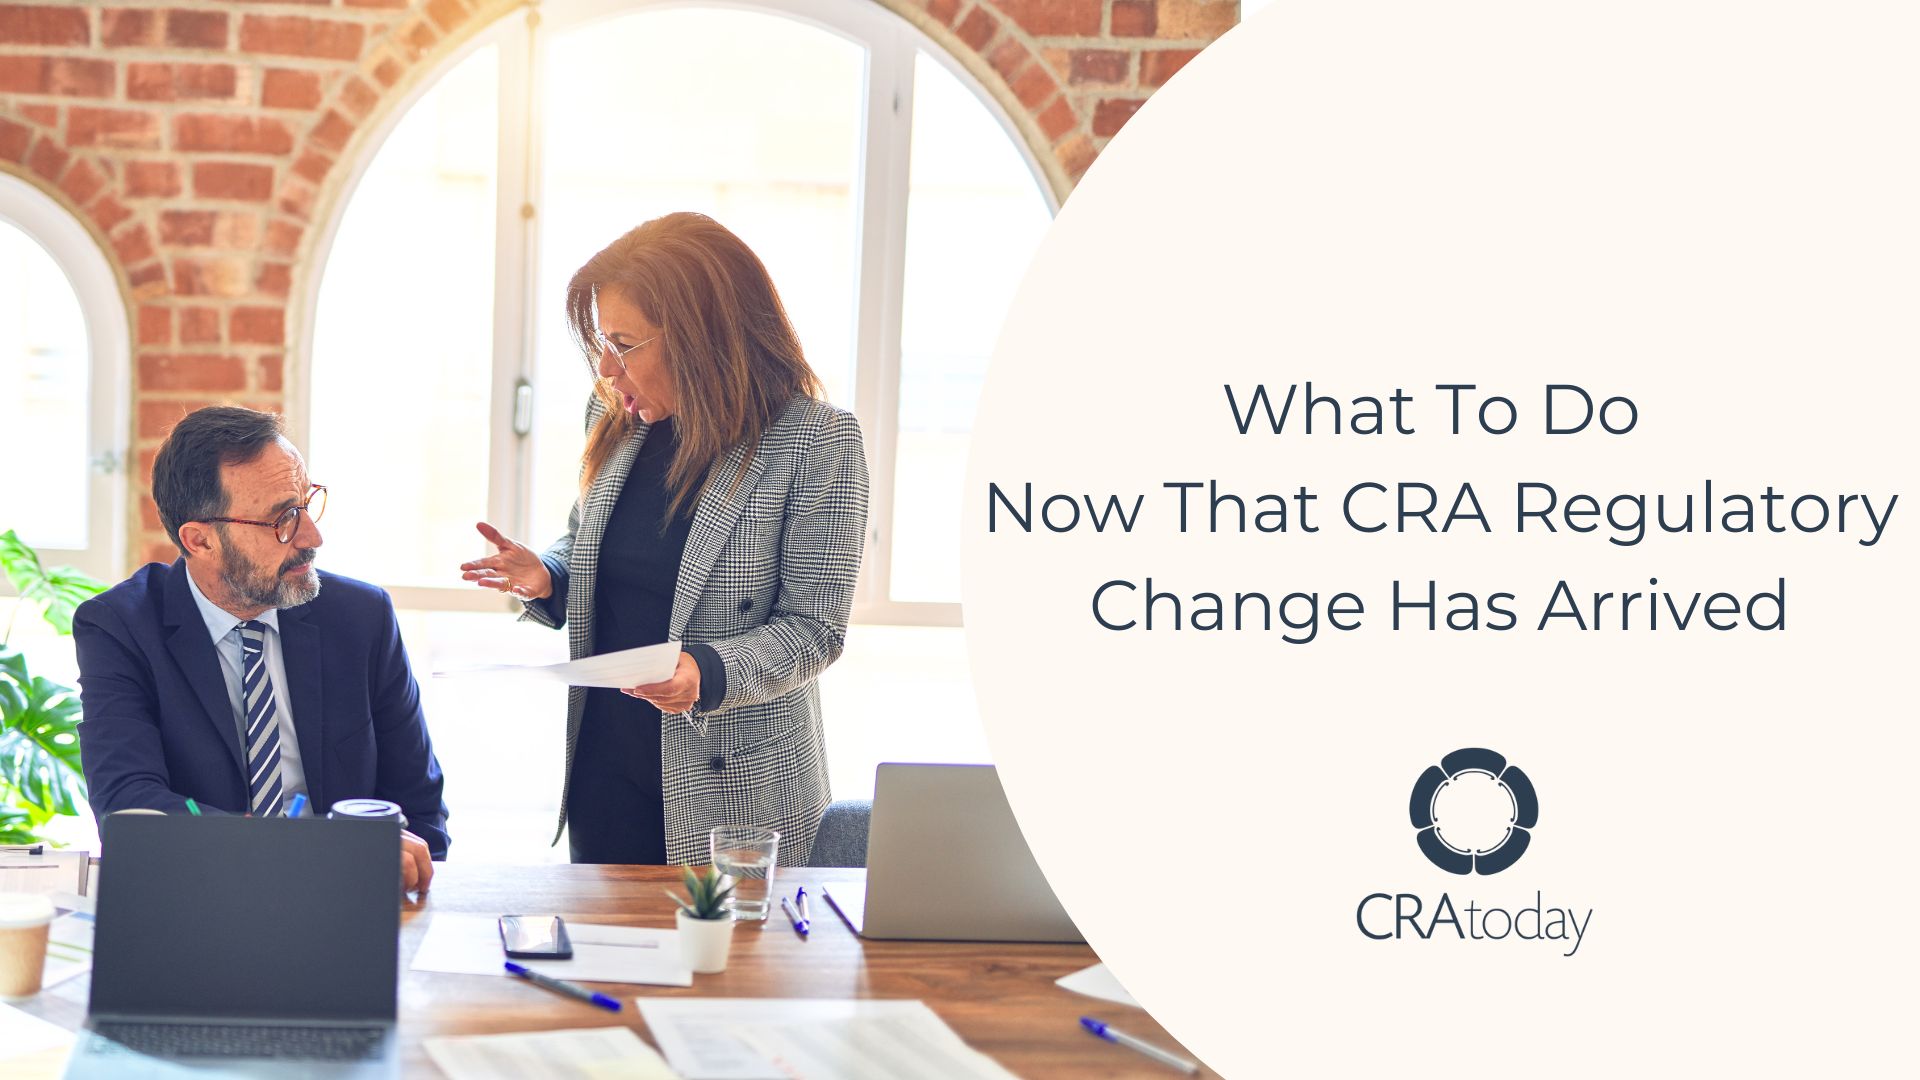 What To Do Now That CRA Regulatory Change Has Arrived